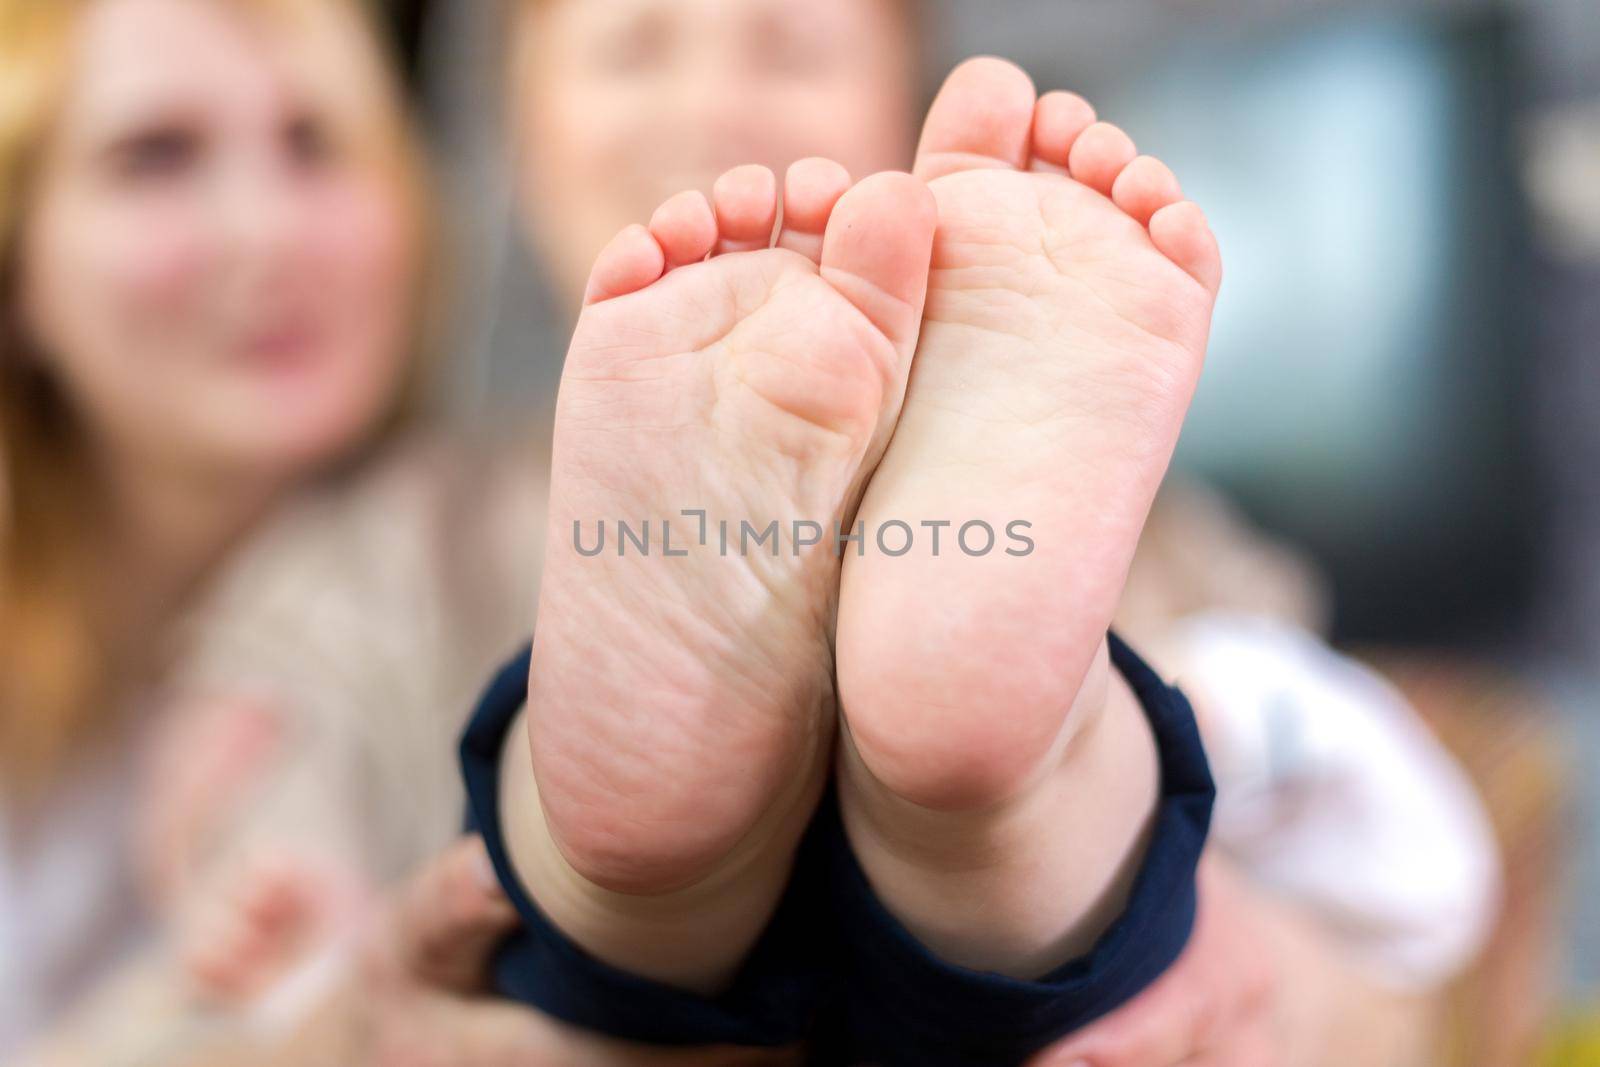 Parents and children hold the baby's heels in the palms of their hands. by Yurich32